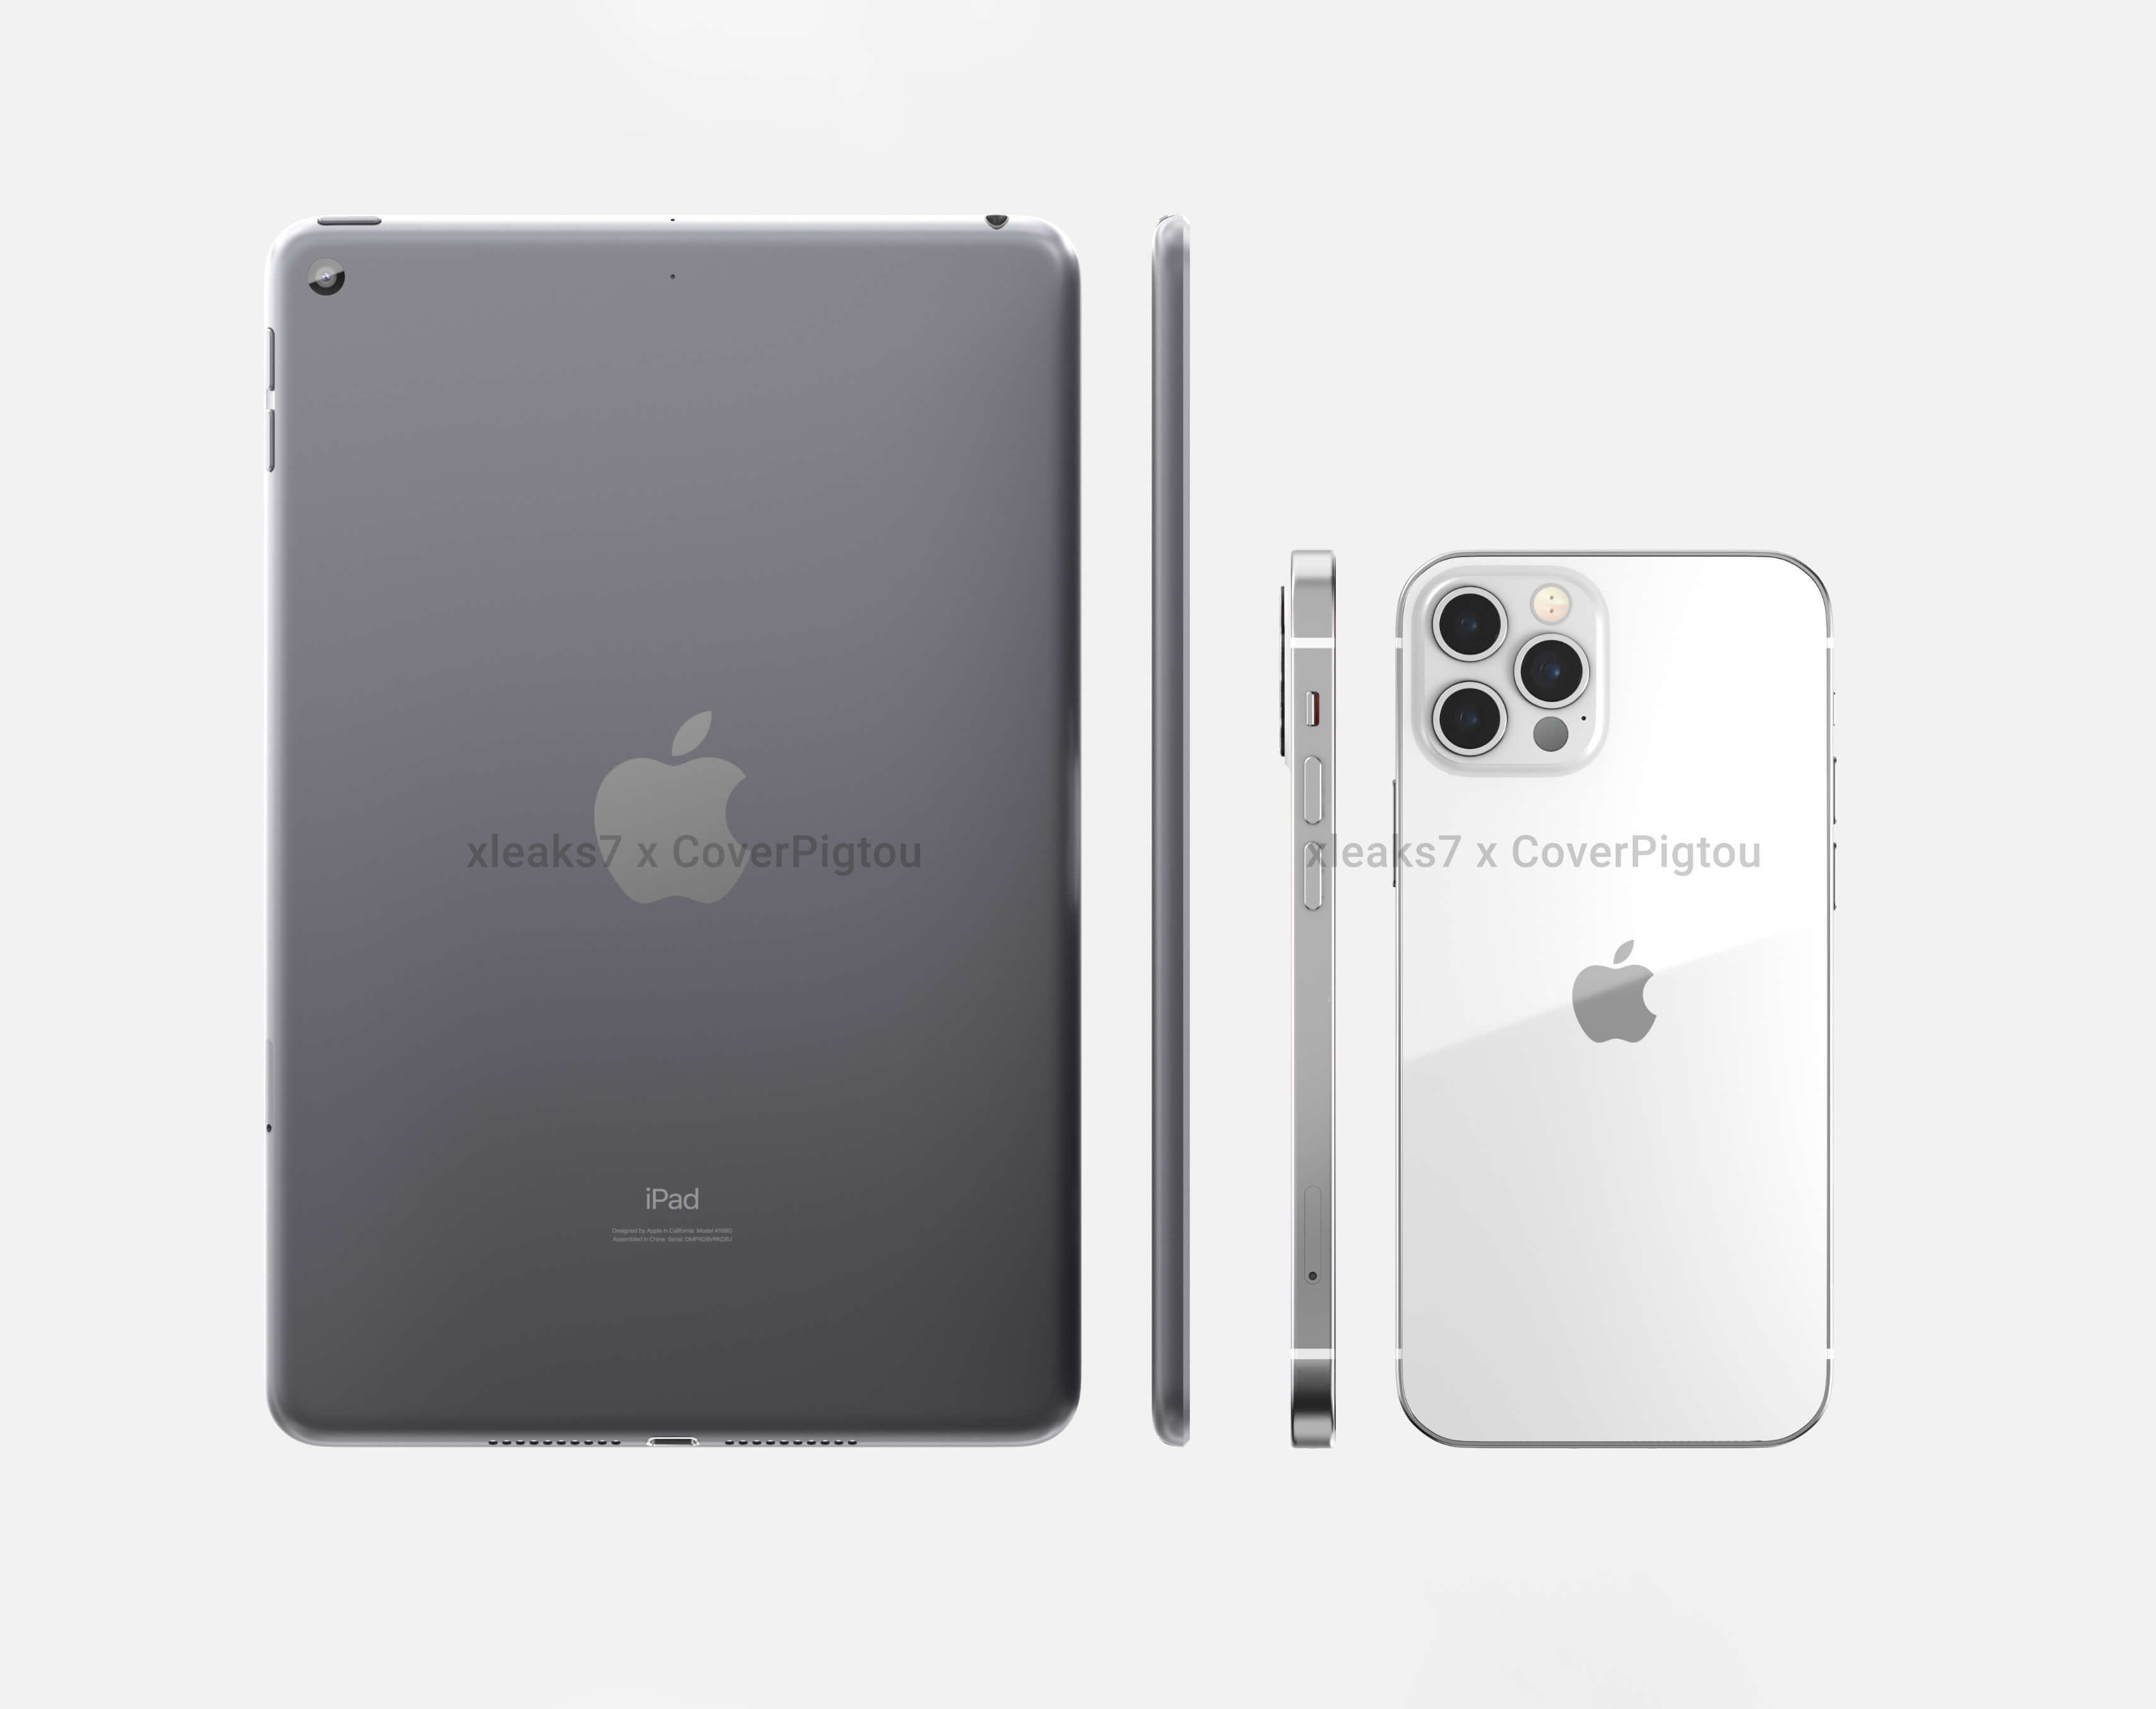 Apple's alleged iPad mini 6 vs the iPhone 12 Pro - Sketchy iPad mini 6 leak points towards in-screen Touch ID, punch-hole camera